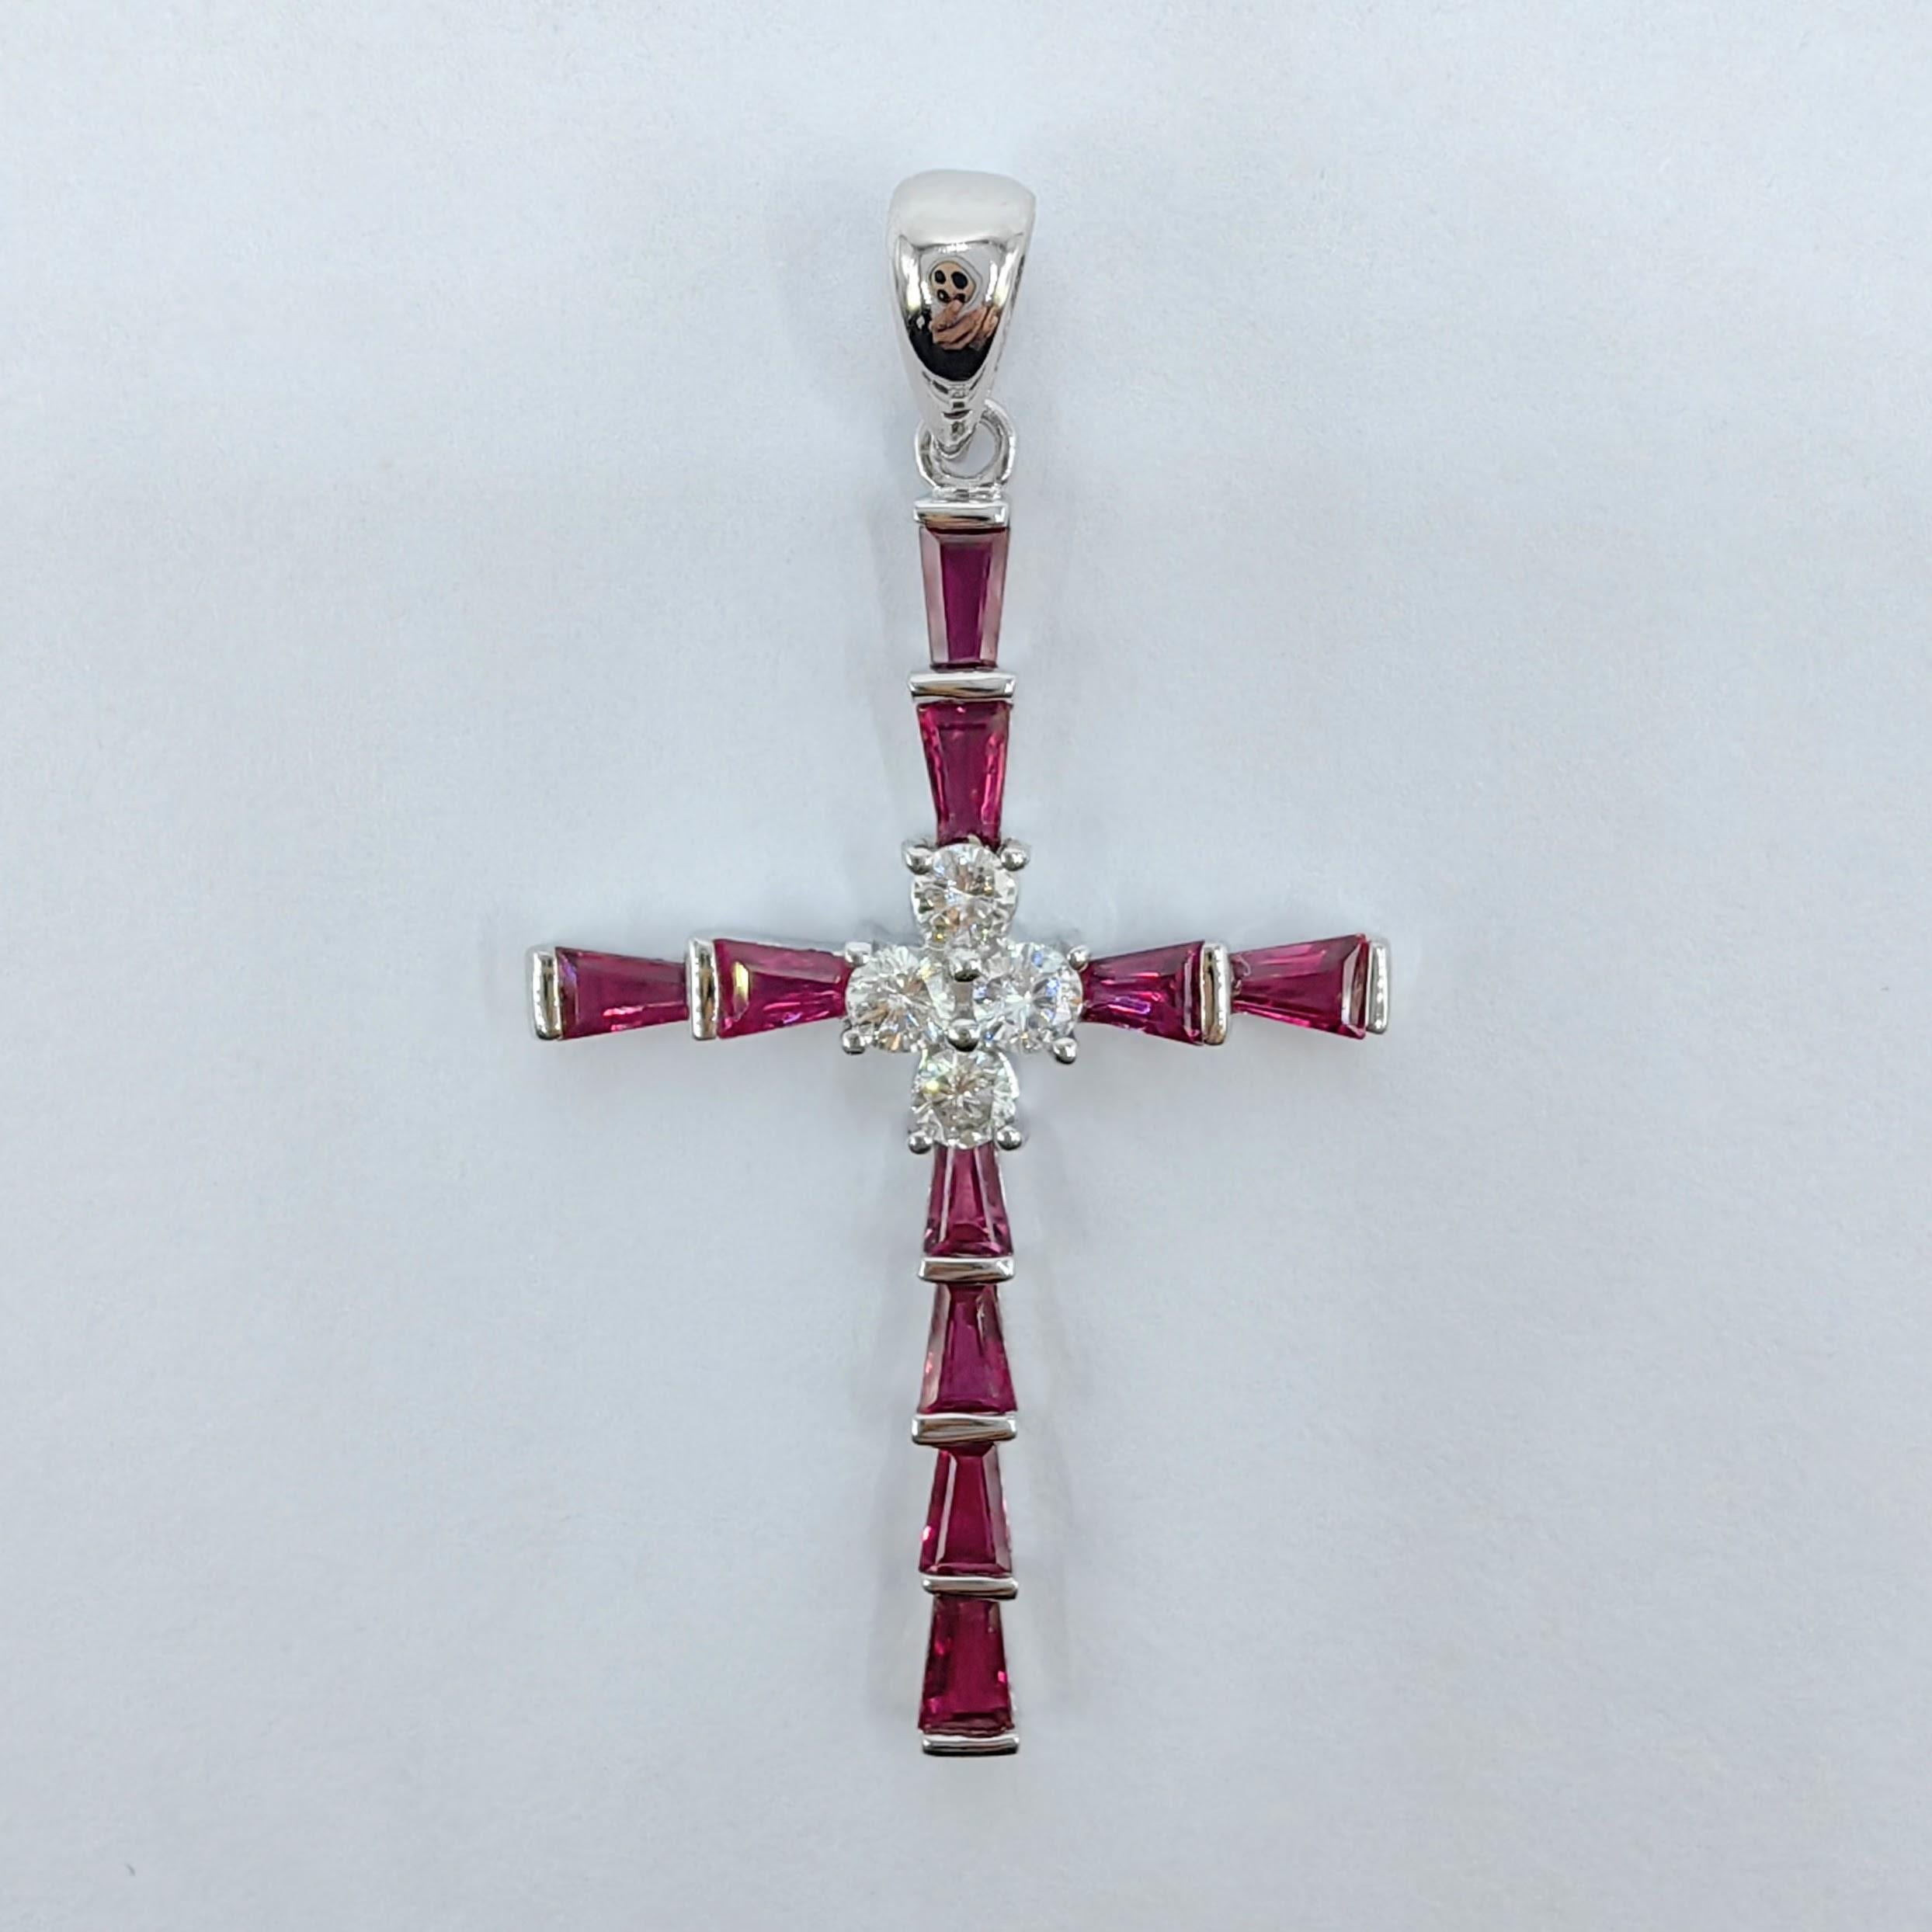 Introducing our exquisite 1.26ct Ruby & Diamond Cross Pendant Necklace in 18K White Gold. This stunning piece of jewelry combines the timeless elegance of pigeon blood rubies and diamonds, creating a symbol of faith and beauty.

The cross pendant